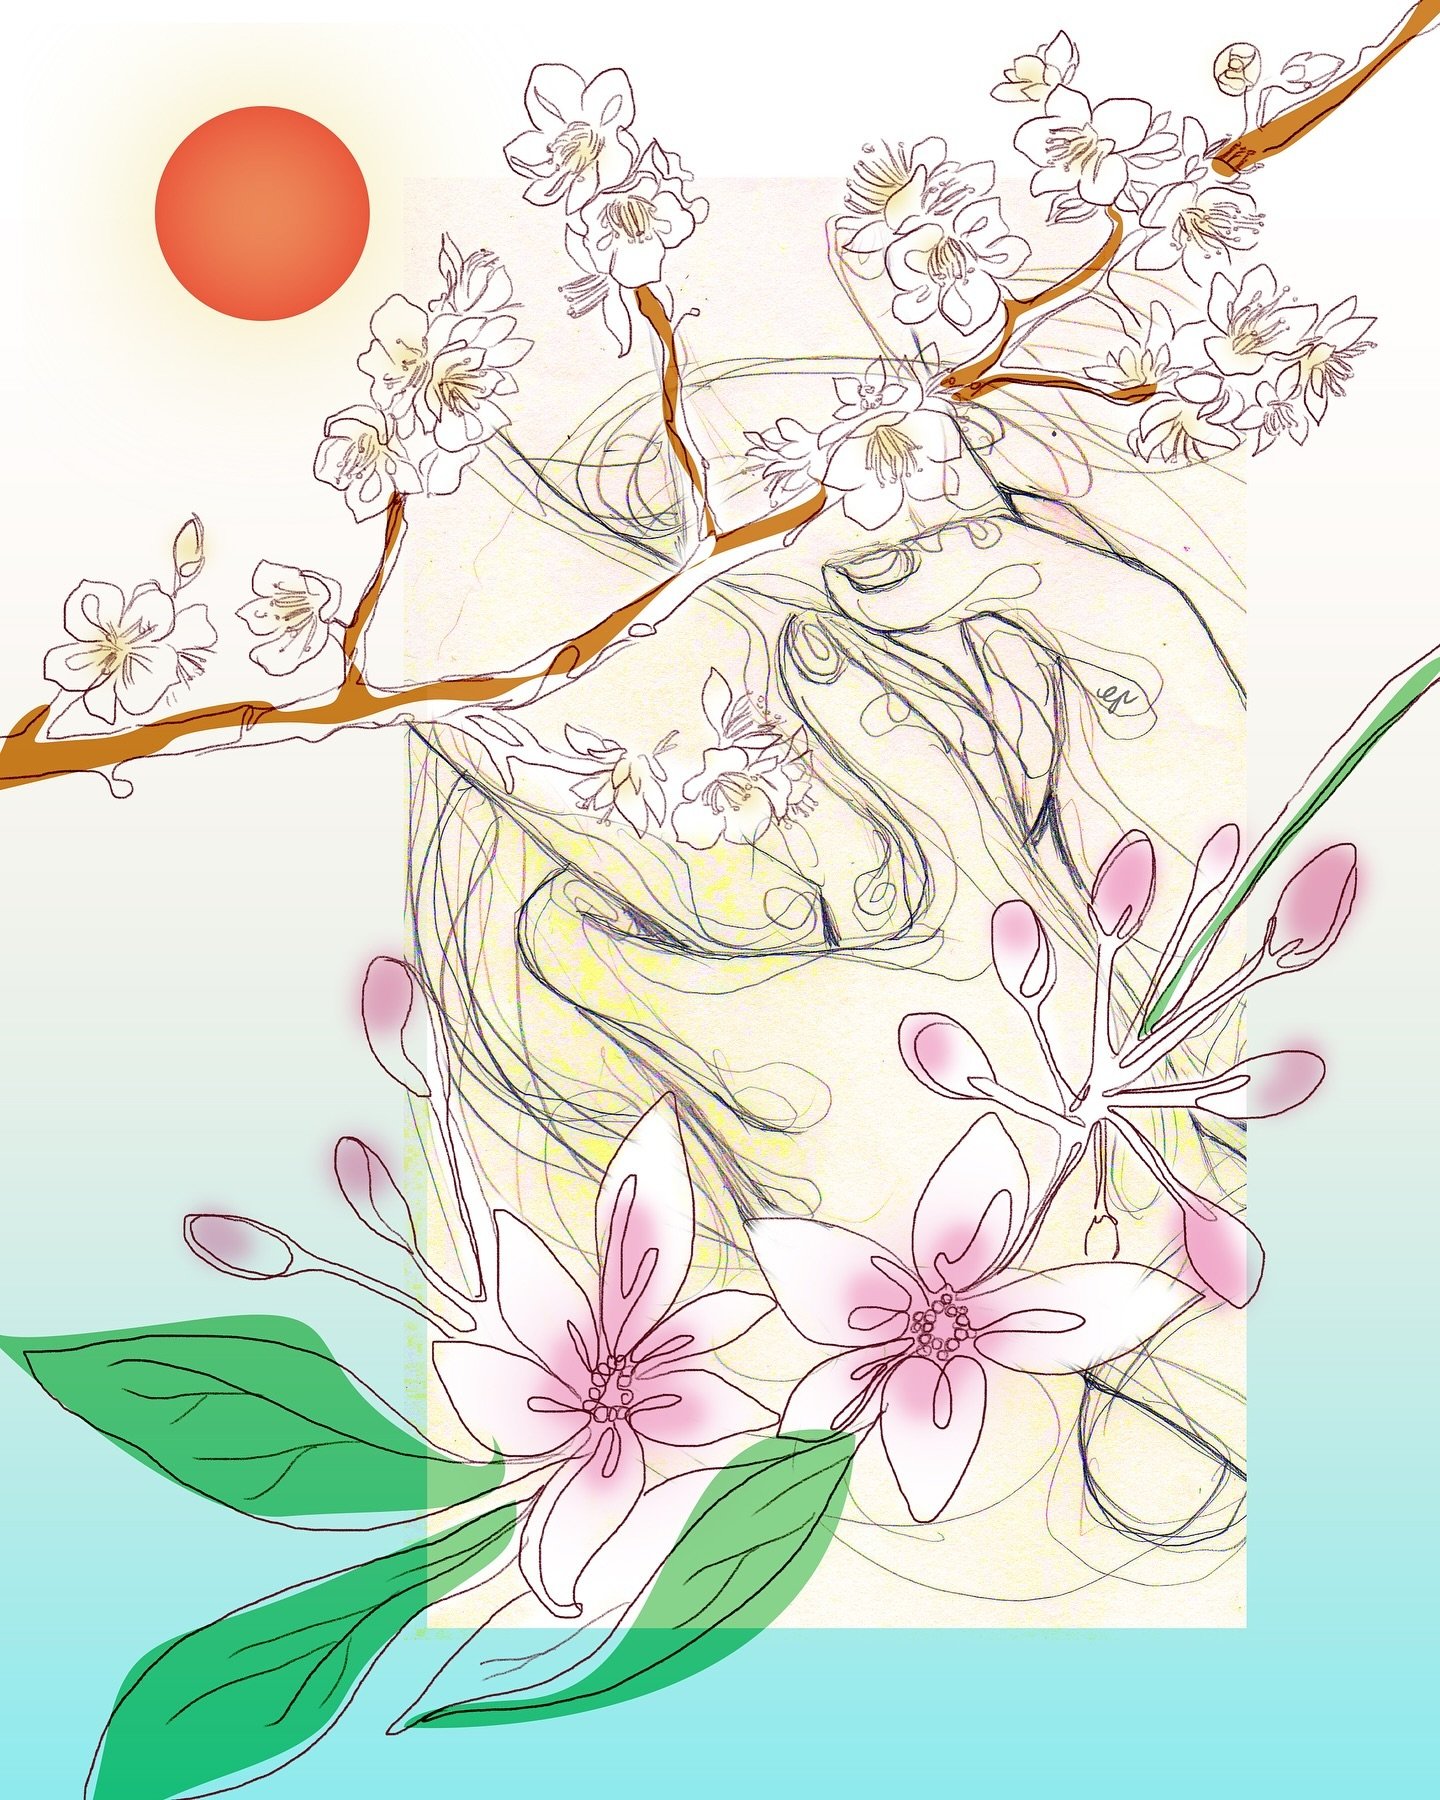 To celebrate Japanese-Philippine friendship, I created this illustration for Japan Foundation Manila&rsquo;s magazine&mdash;SUKi along with the story behind it: 

Cherry blossoms and Aunasin are flowering trees native to Japan and the Philippines res